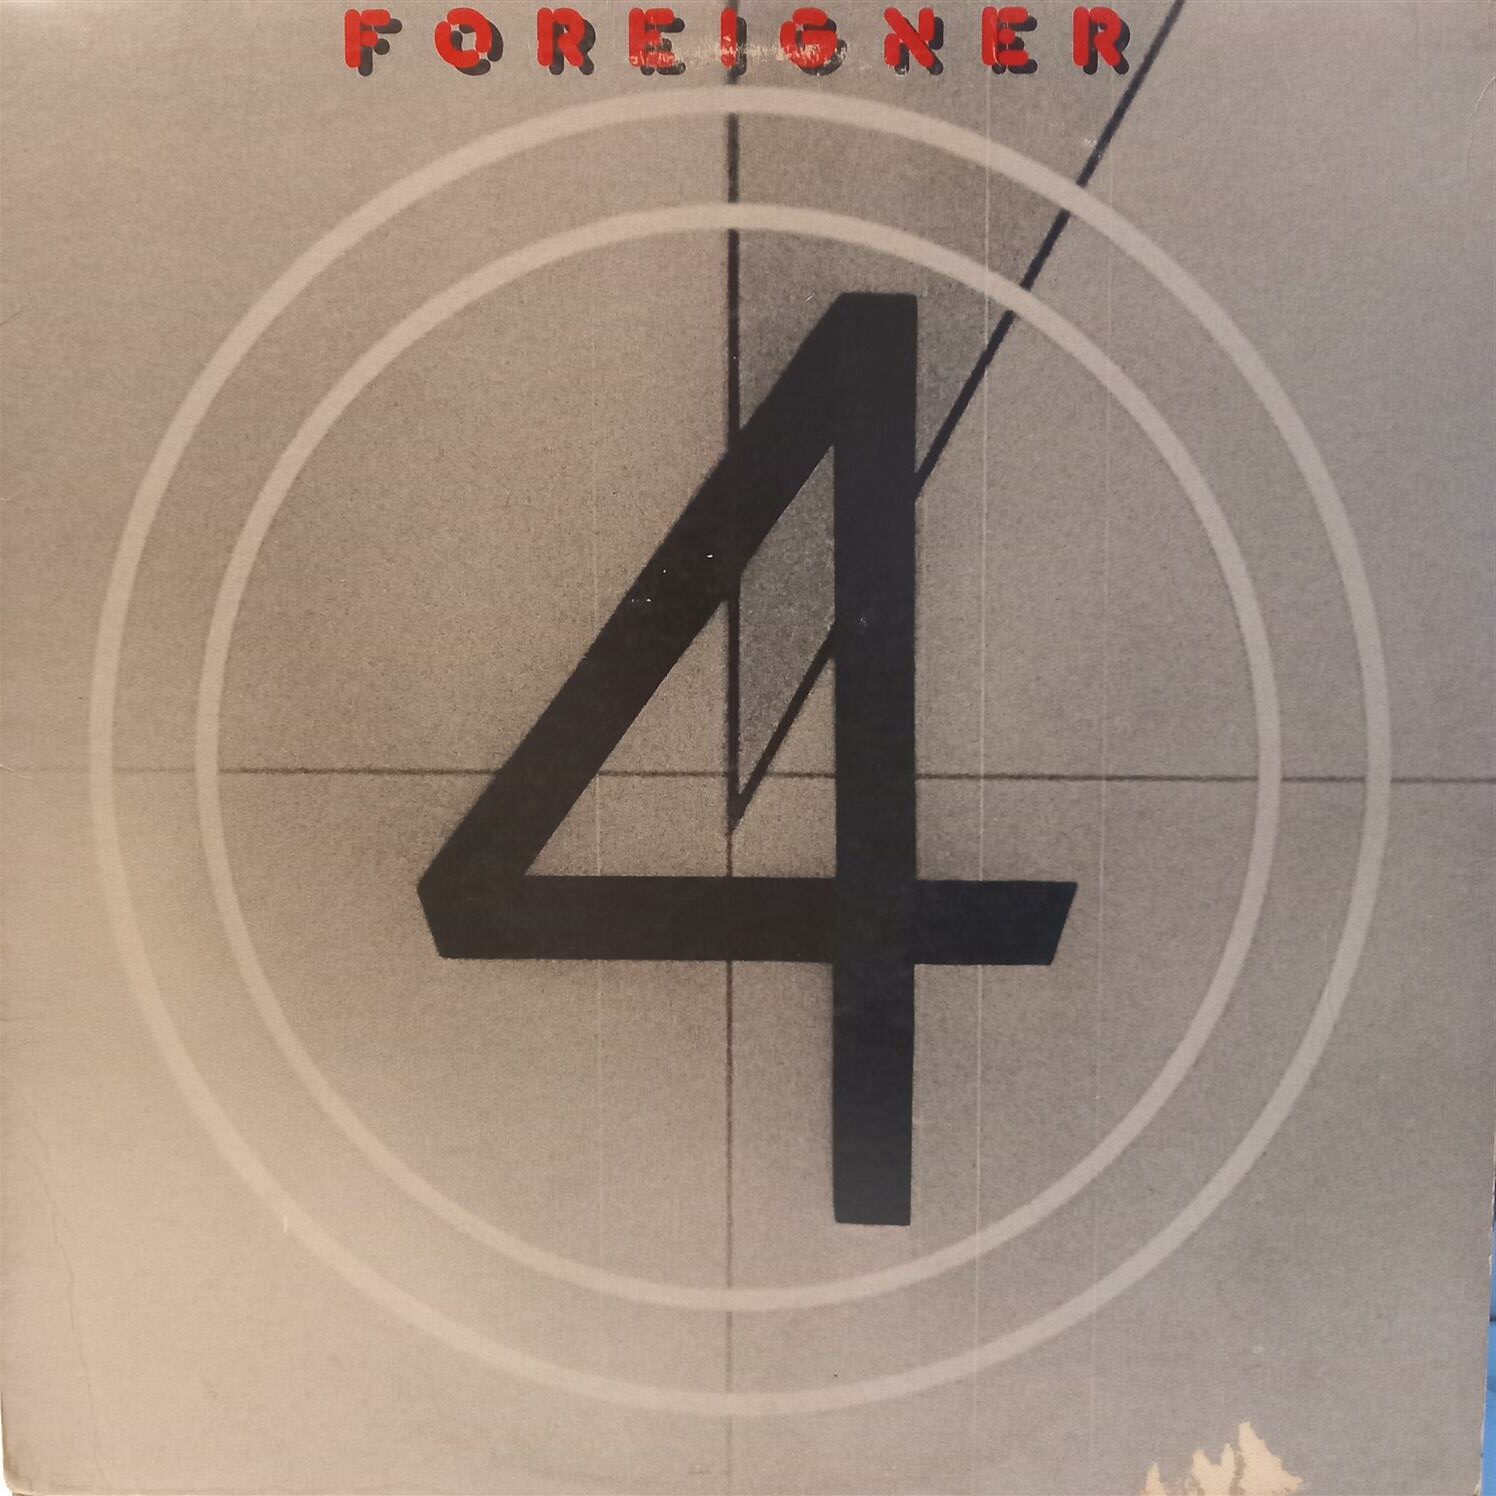 FOREIGNER – 4 ON